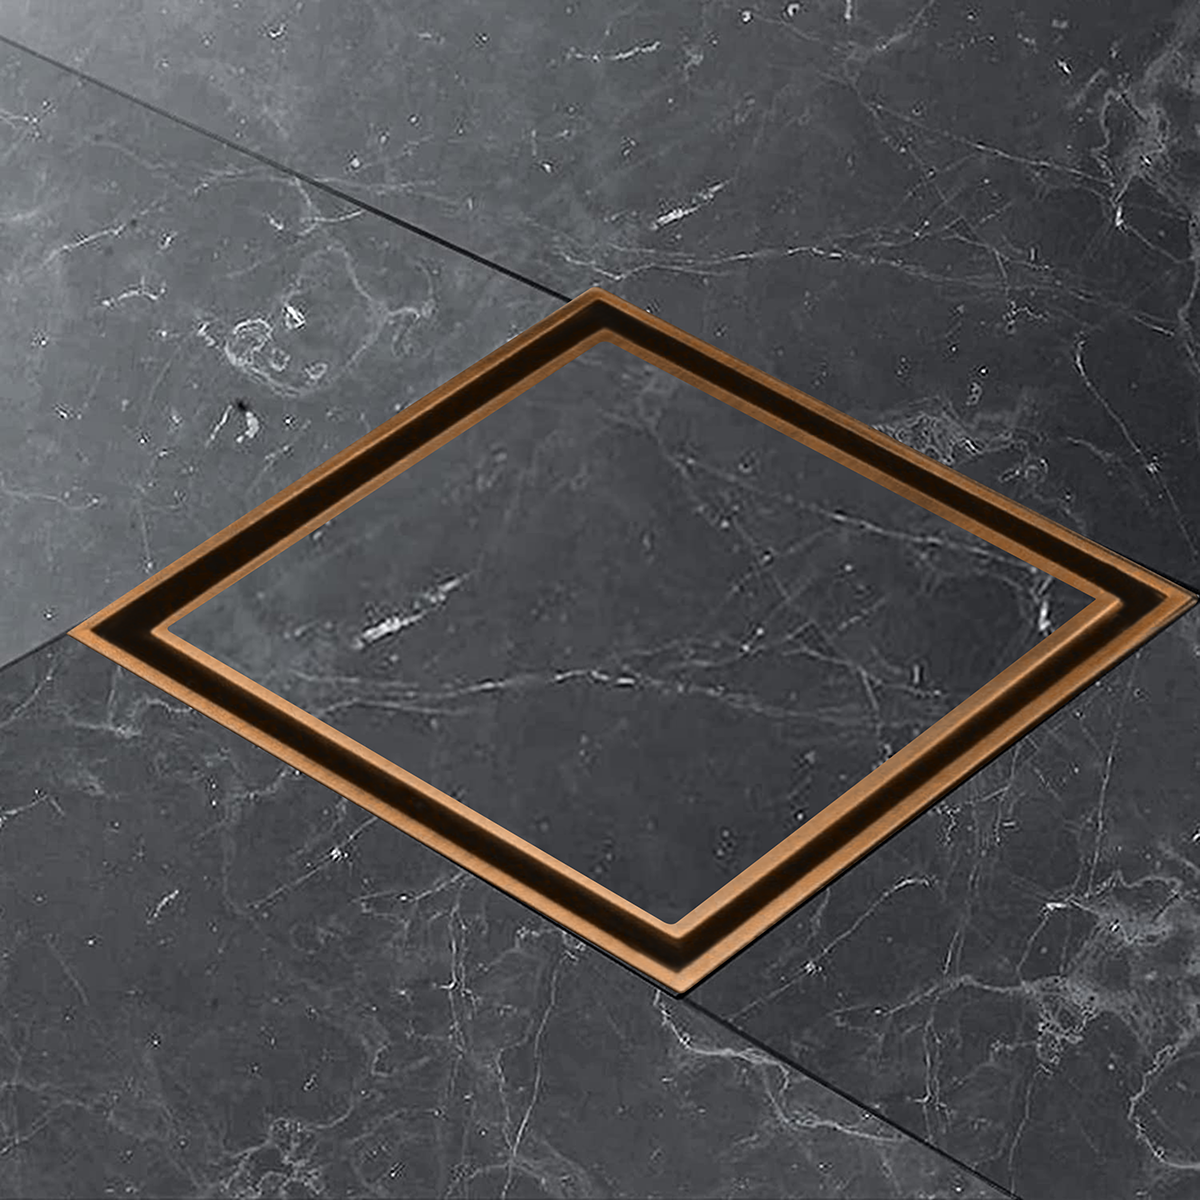 Marble Insert Shower Drain Channel (6 x 6 Inches) ROSE GOLD/ ANTIQUE COPPER installed